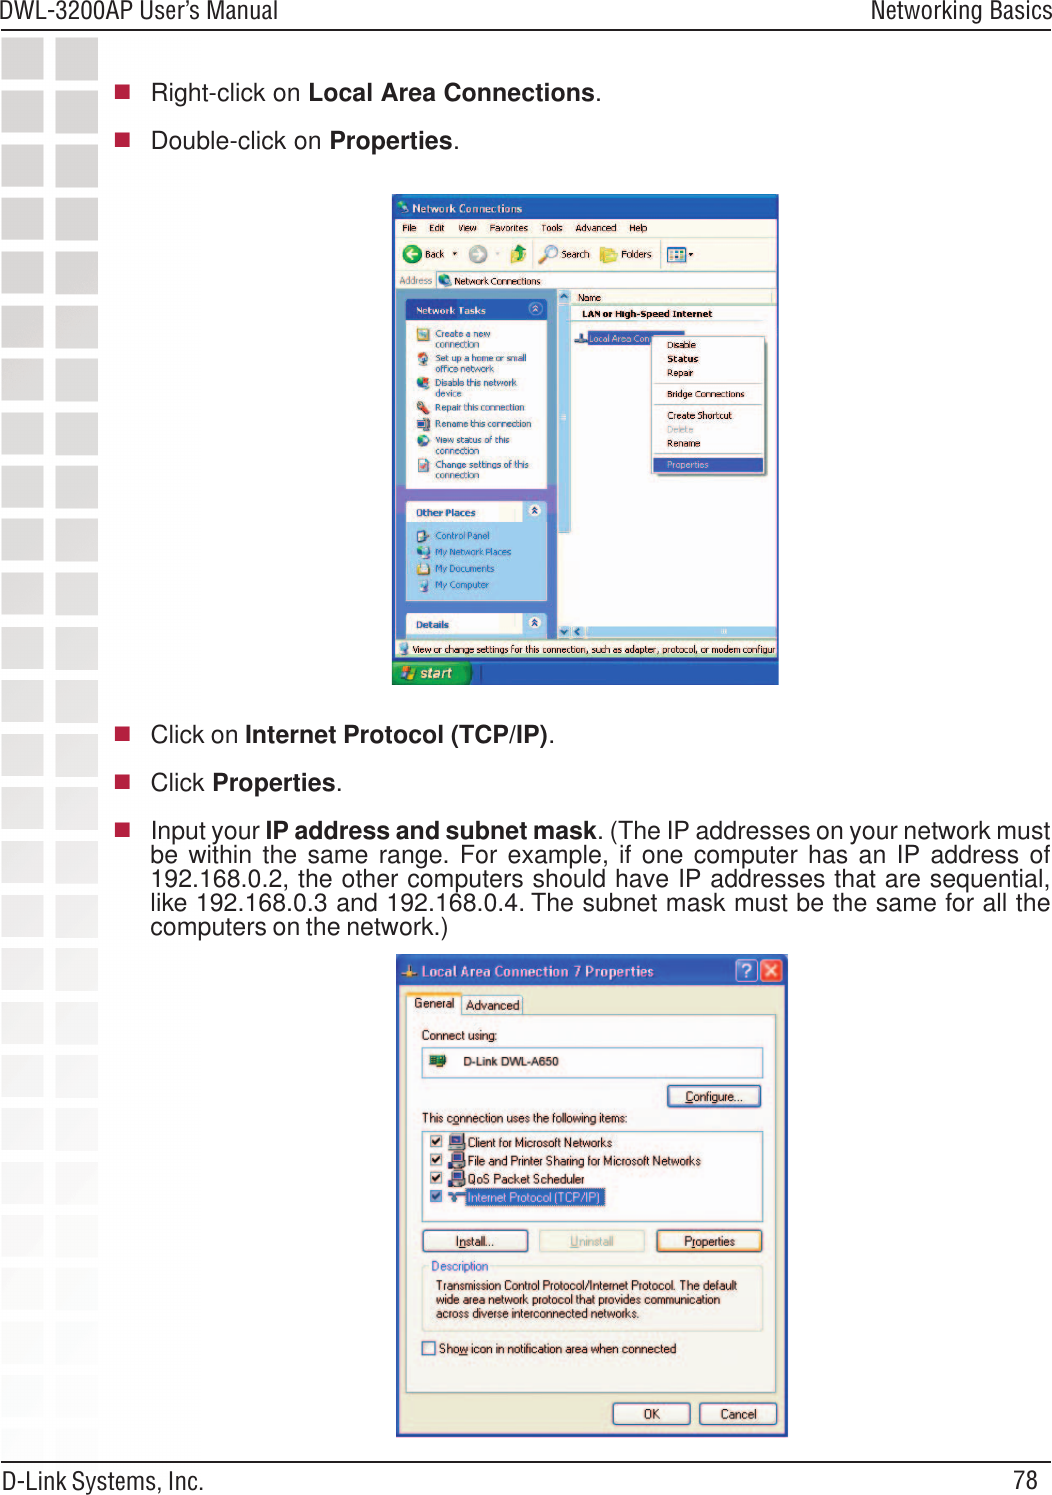 78DWL-3200AP User’s ManualD-Link Systems, Inc.Networking BasicsRight-click on Local Area Connections.Double-click on Properties.Click on Internet Protocol (TCP/IP).Click Properties.Input your IP address and subnet mask. (The IP addresses on your network mustbe within the same range. For example, if one computer has an IP address of192.168.0.2, the other computers should have IP addresses that are sequential,like 192.168.0.3 and 192.168.0.4. The subnet mask must be the same for all thecomputers on the network.)